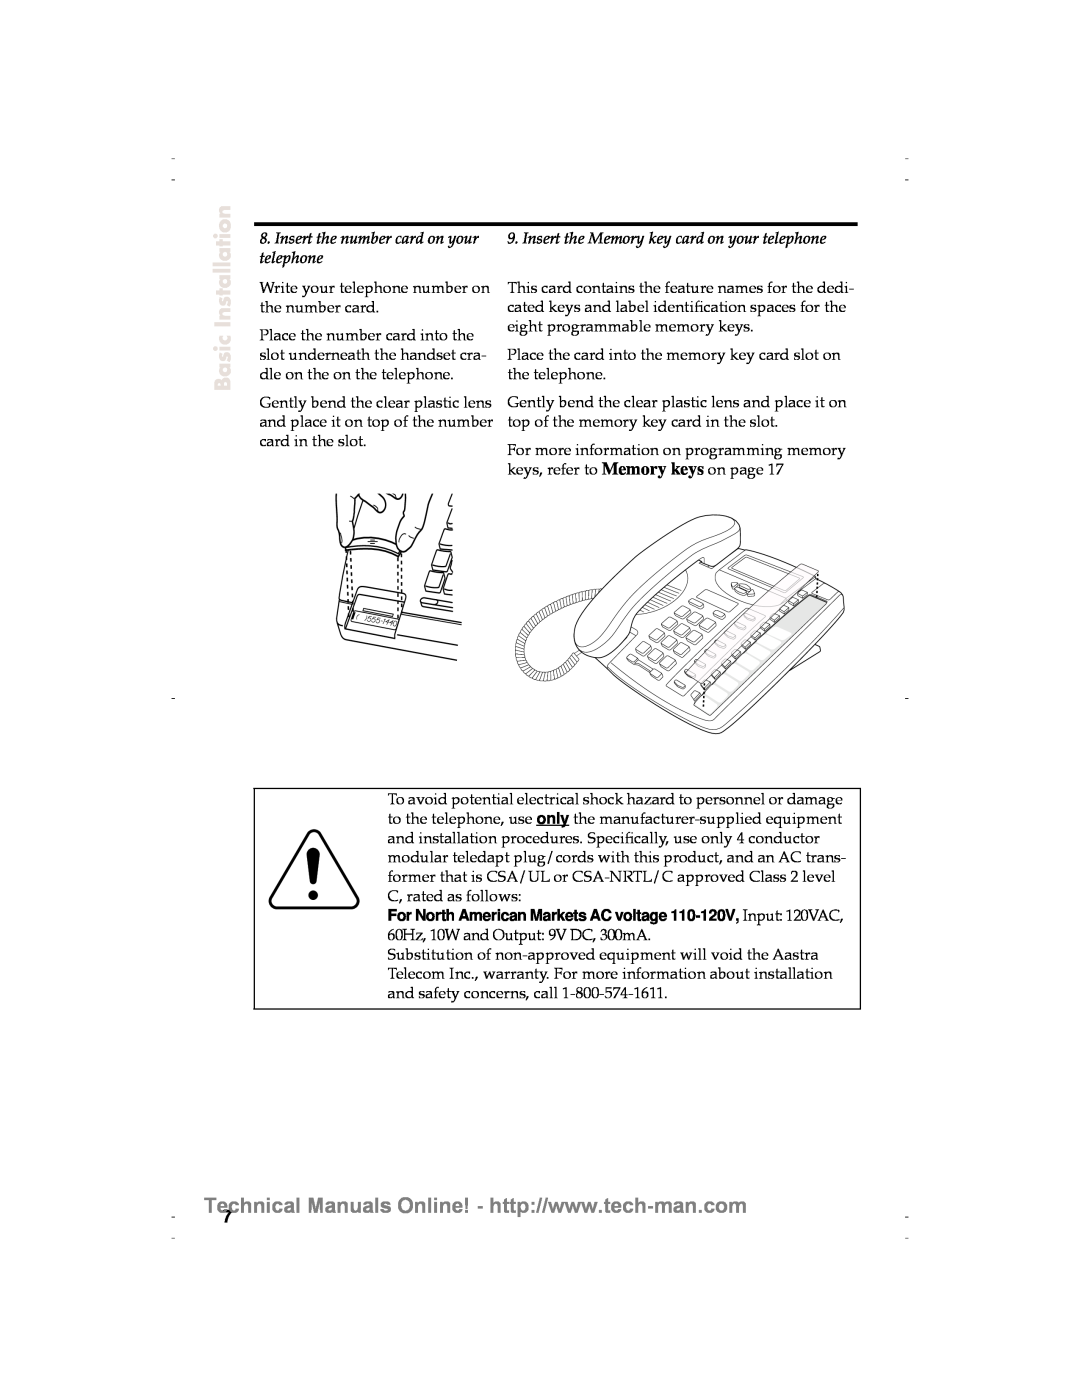 Aastra Telecom 9116 technical manual Installation, Basic, For North American Markets AC voltage 110-120V, Input 120VAC 